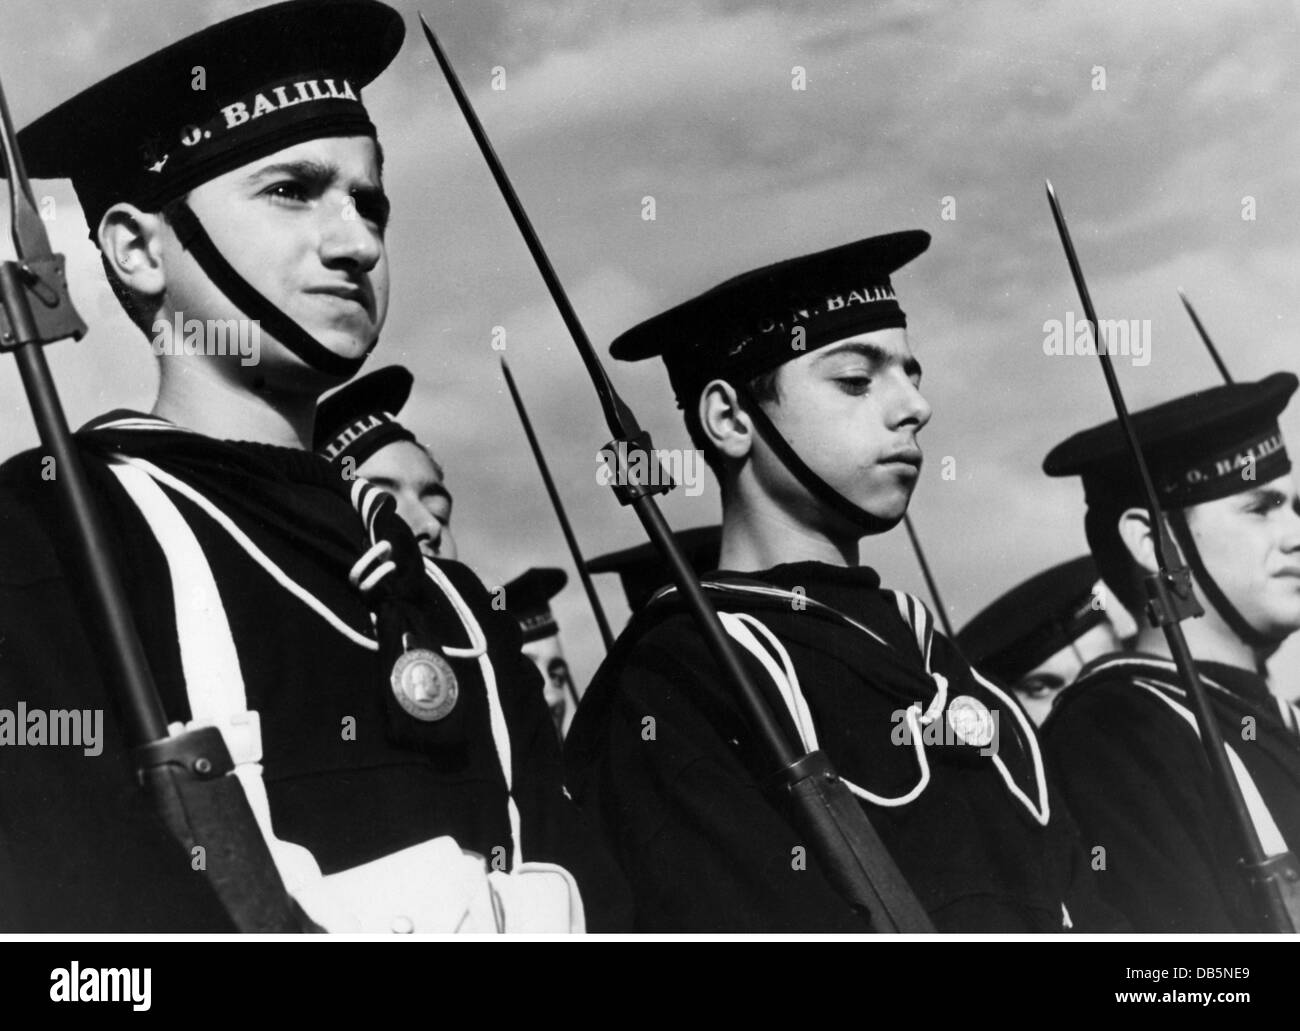 Italy, politics, fascism, members of the Italian Fascist youth organization Opera Nazionale Balilla, Naples, 1937, Additional-Rights-Clearences-Not Available Stock Photo